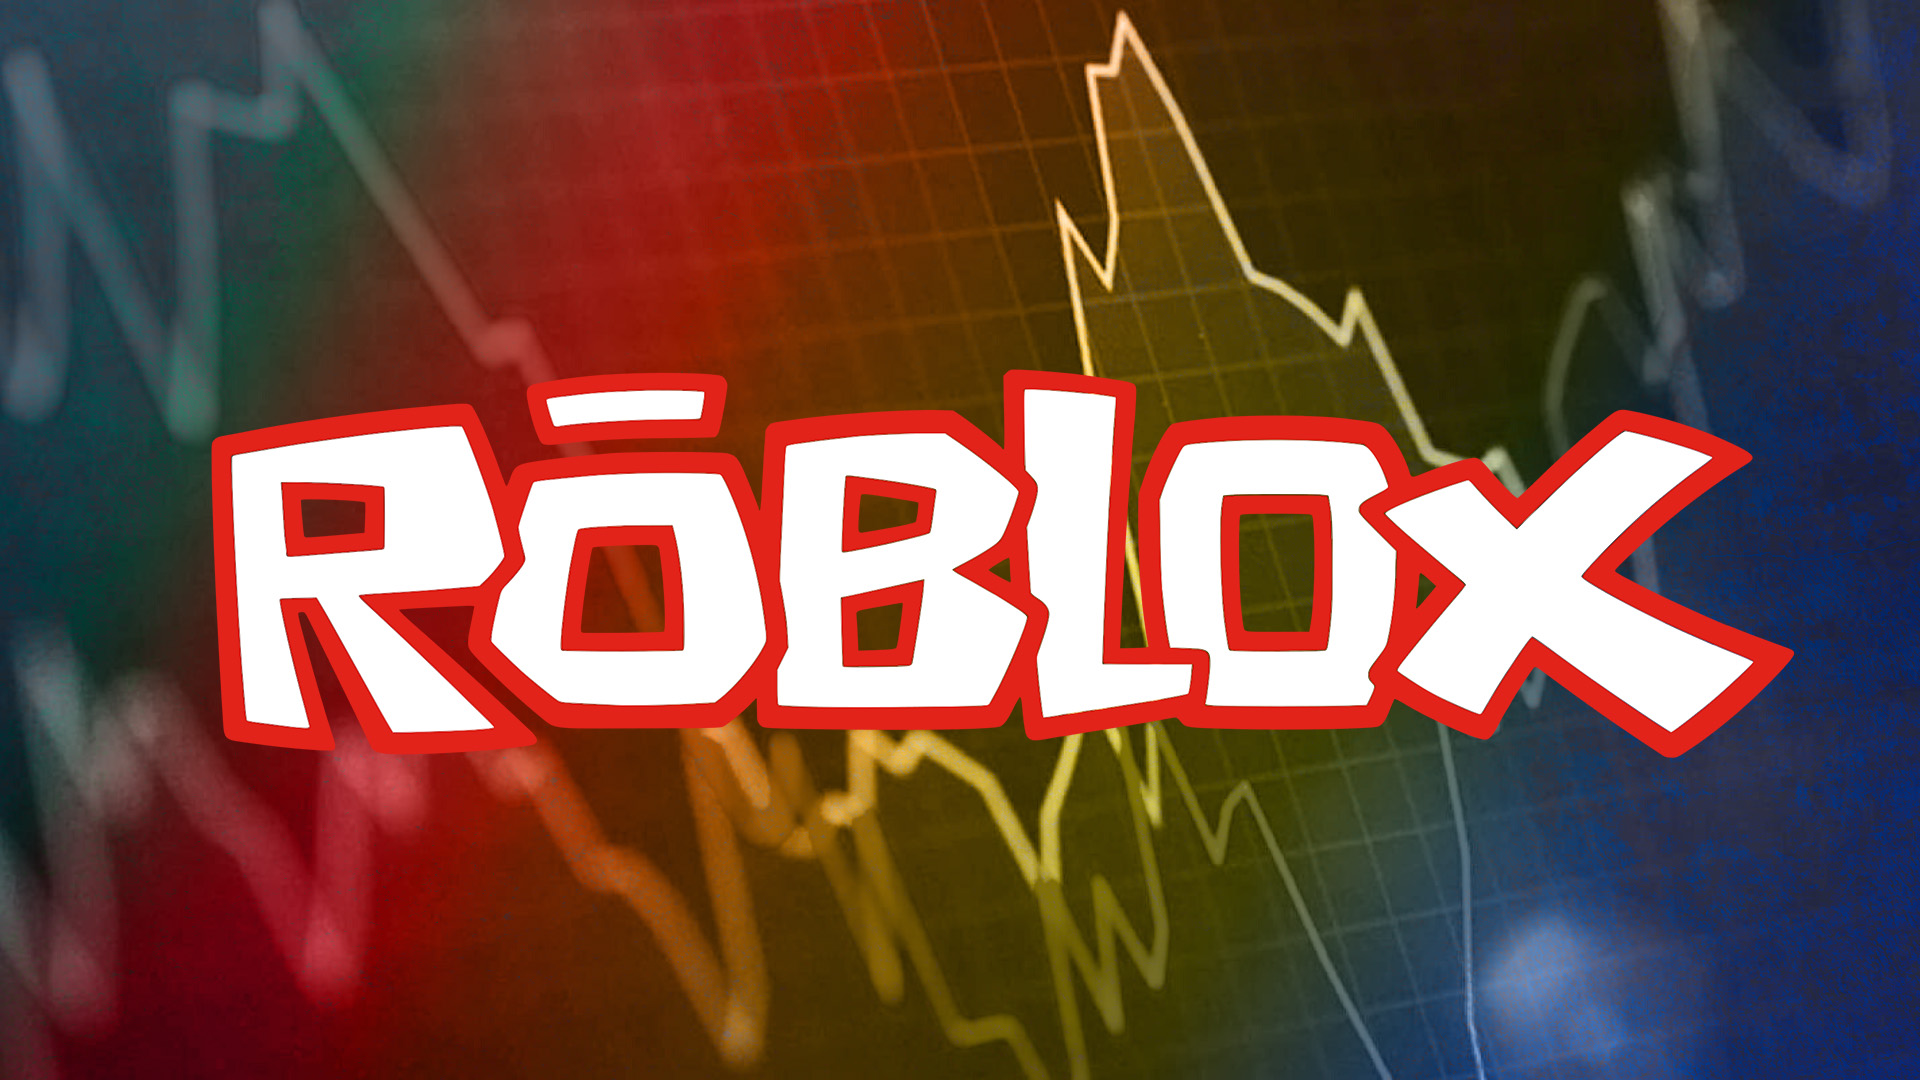 Roblox Stock: Want To Love This Company But The Financials Are A